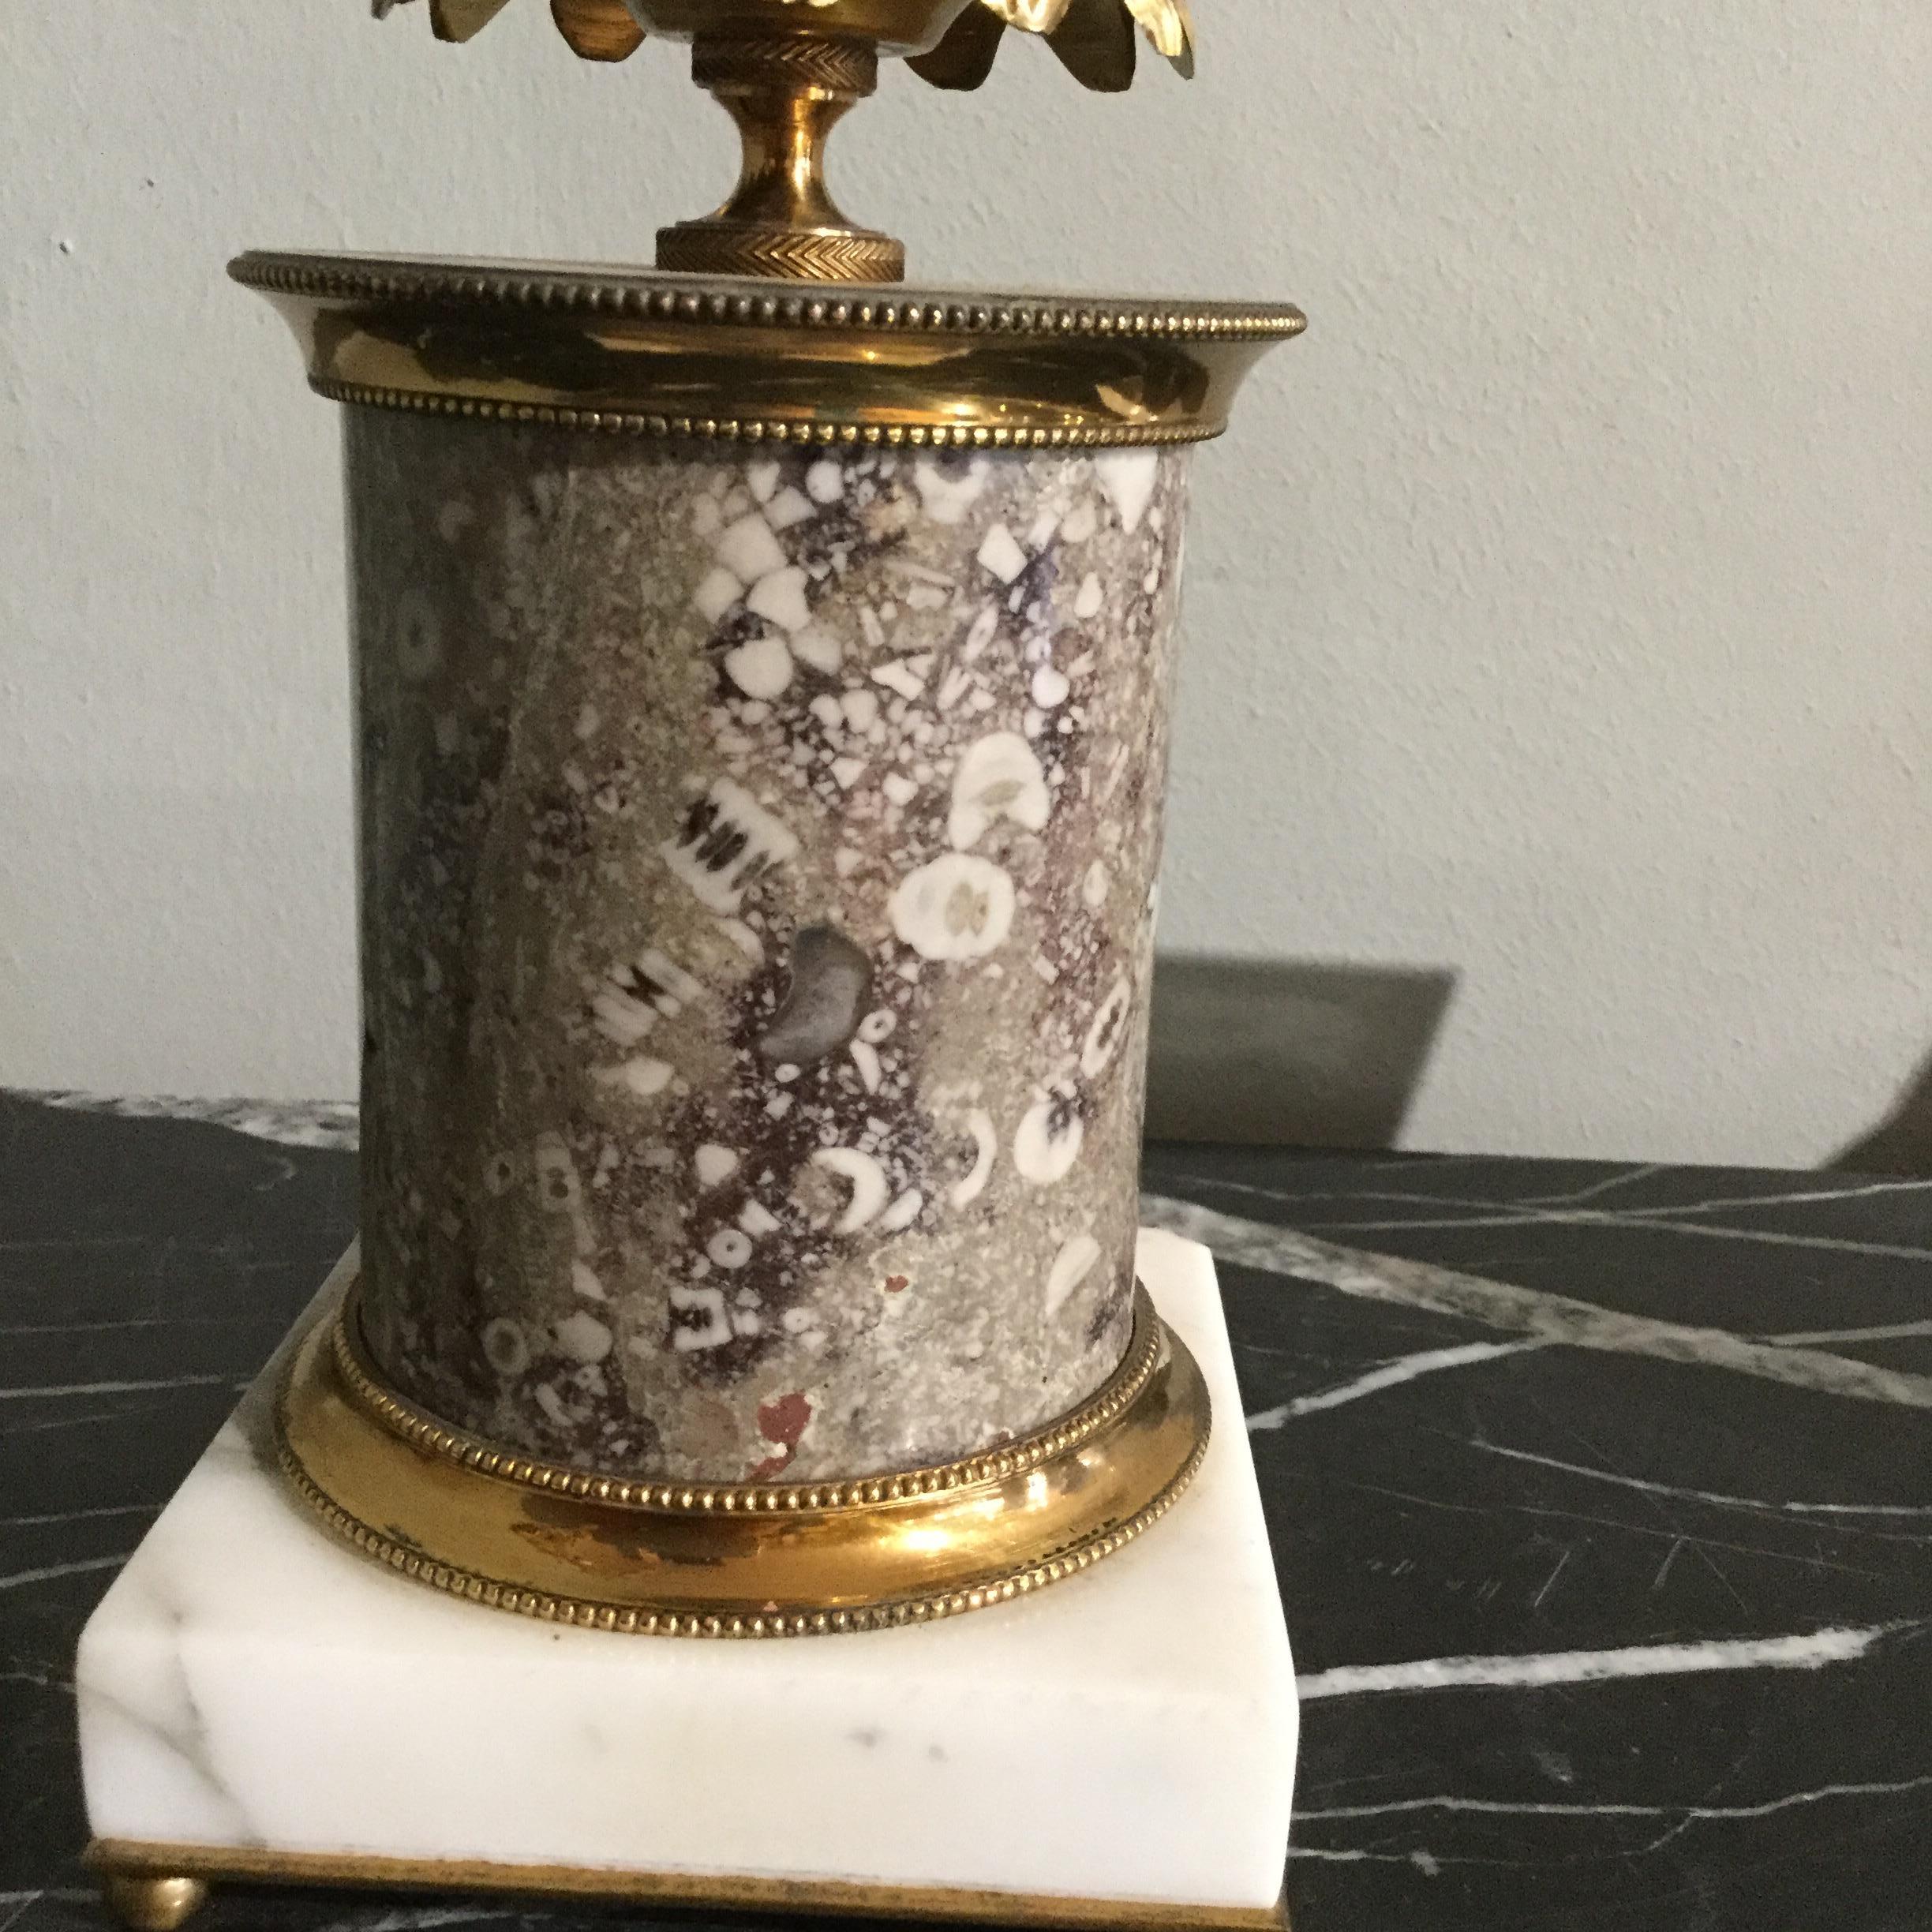 Very Fine Pair of Regency Period Gilt Ormolu and Marble Candlesticks  In Good Condition For Sale In Bradford on Avon, GB